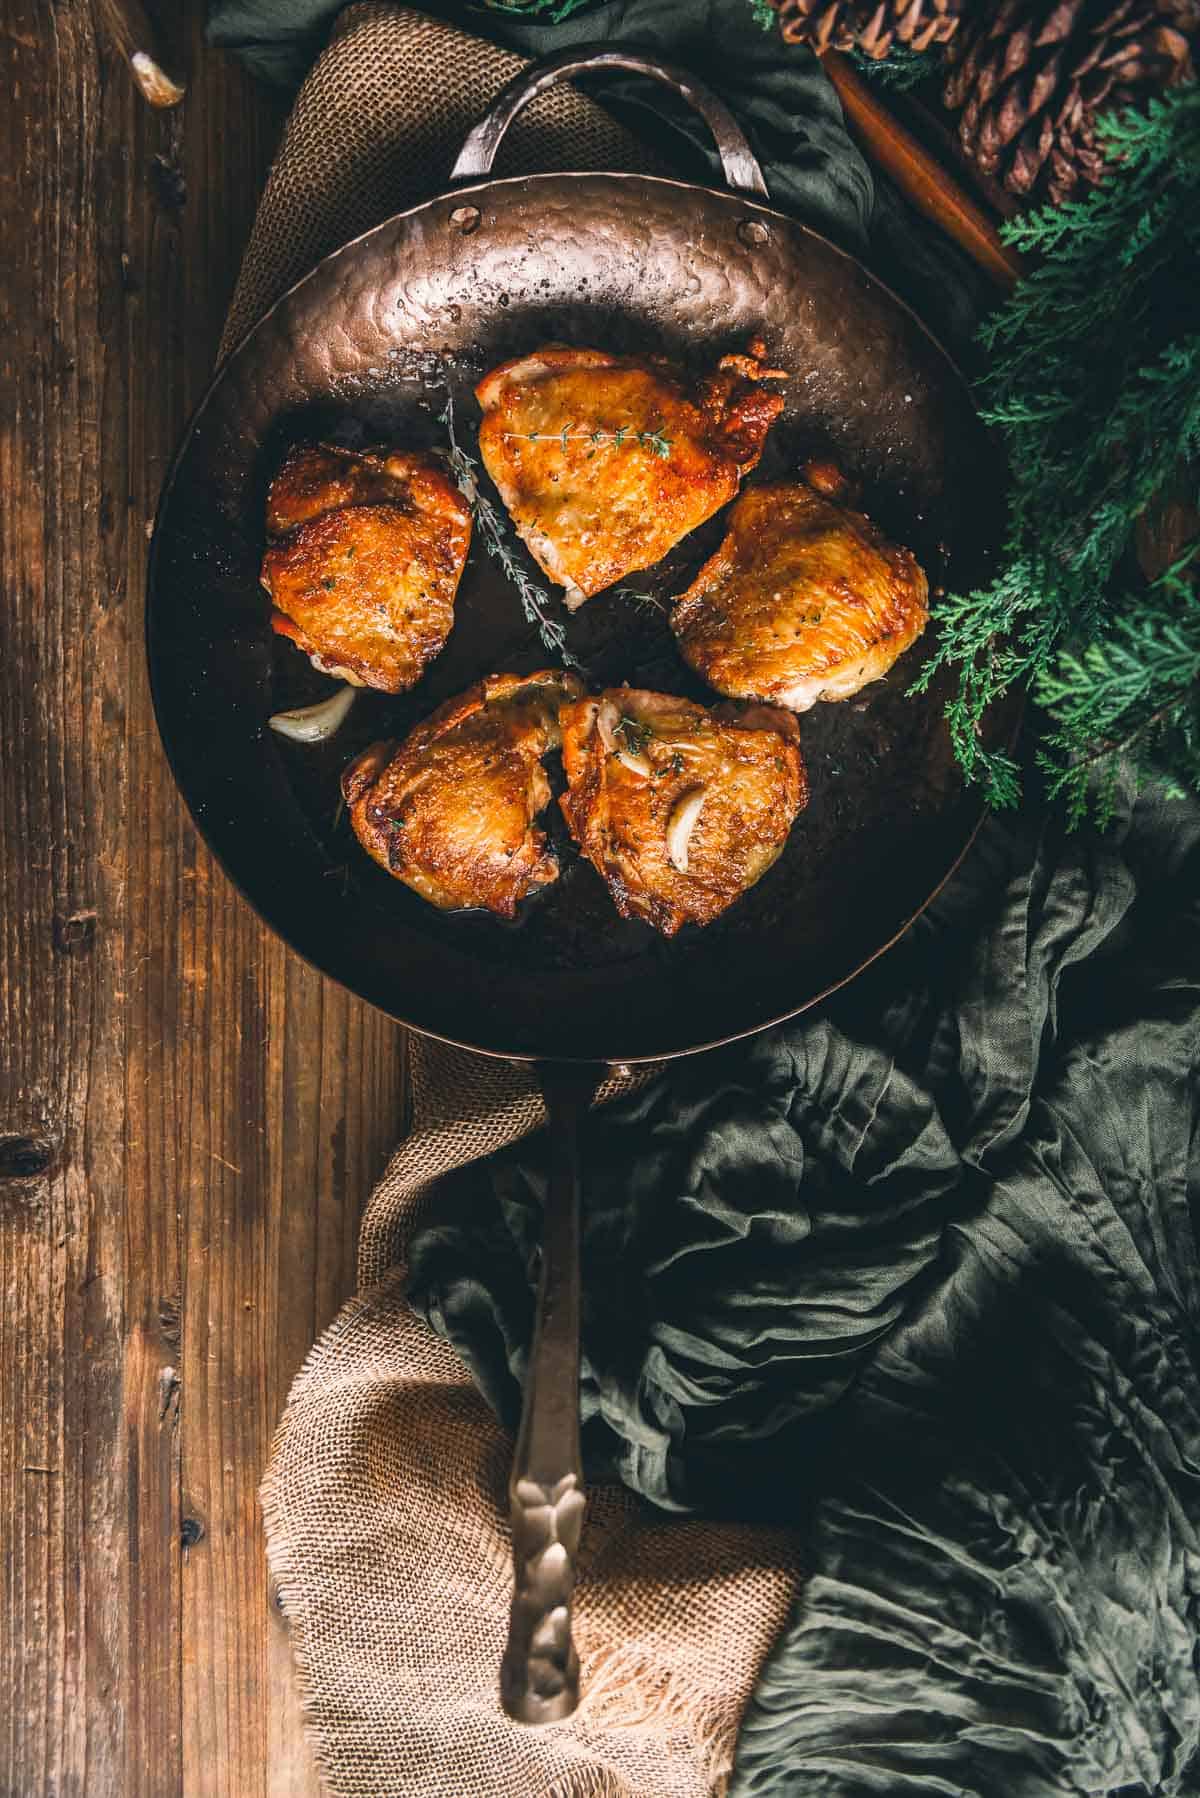 Pan seared chicken in a frying pan on a wooden table.